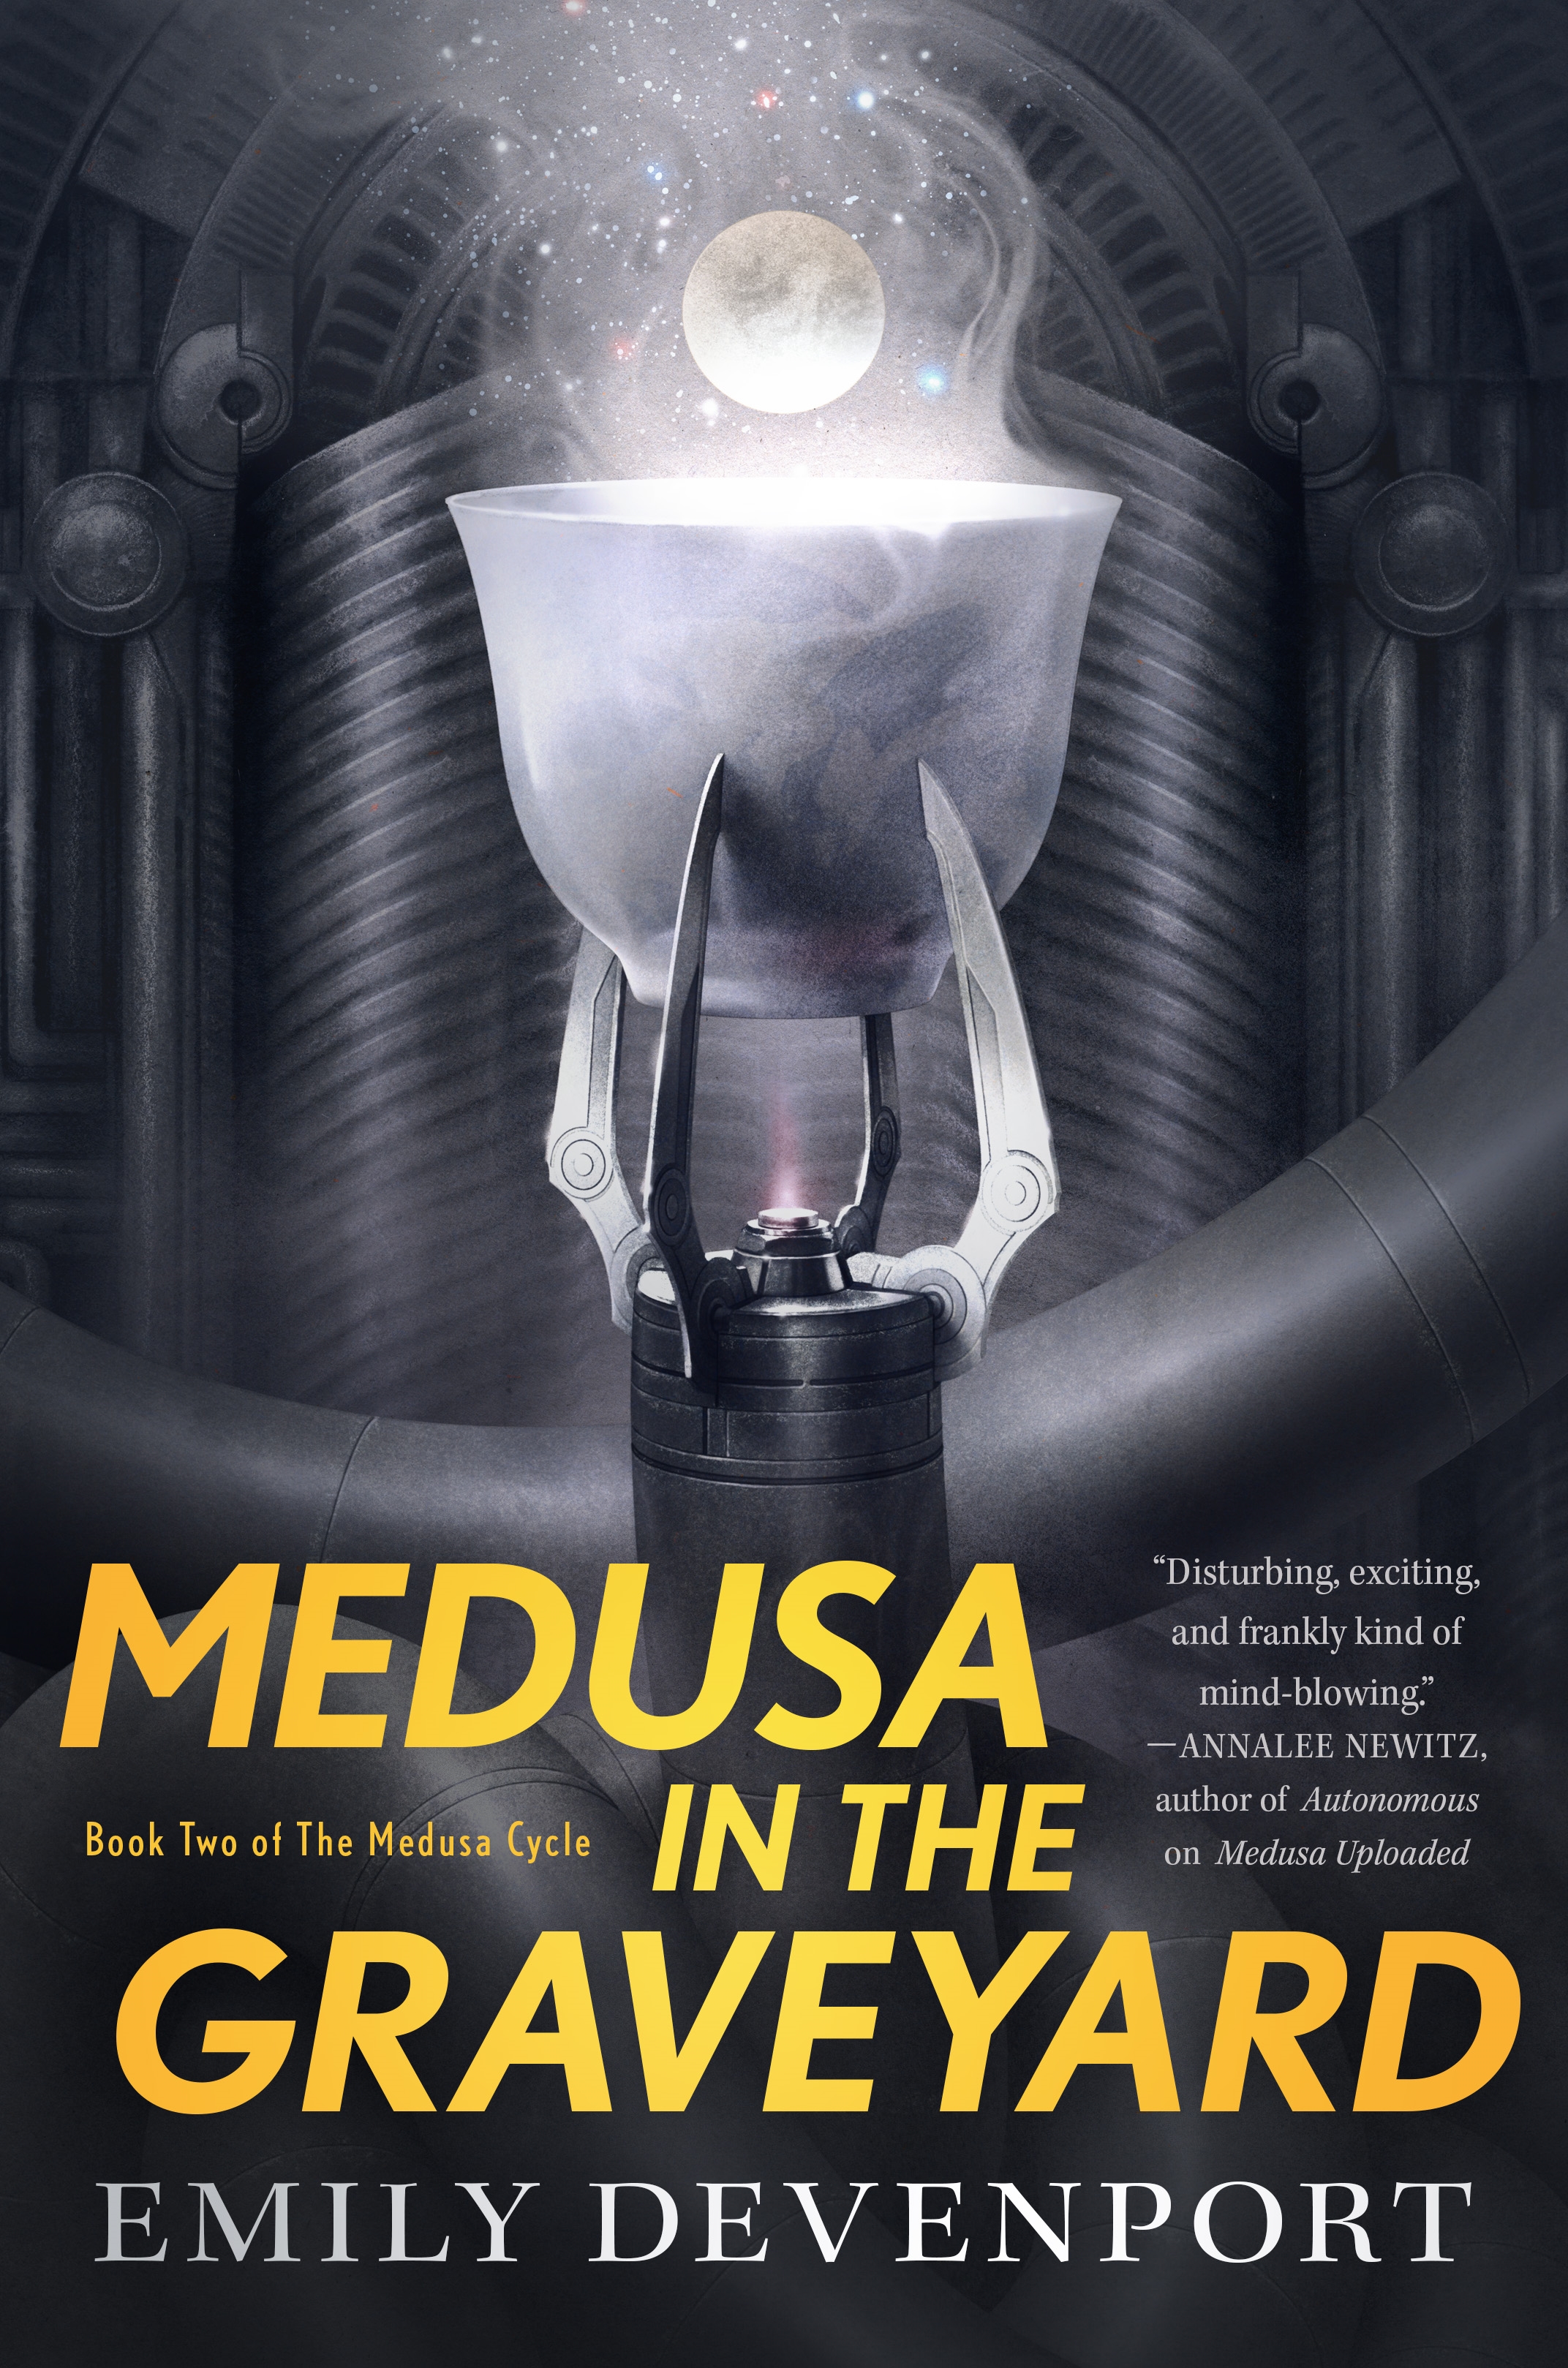 Medusa in the Graveyard : Book Two of the Medusa Cycle by Emily Devenport